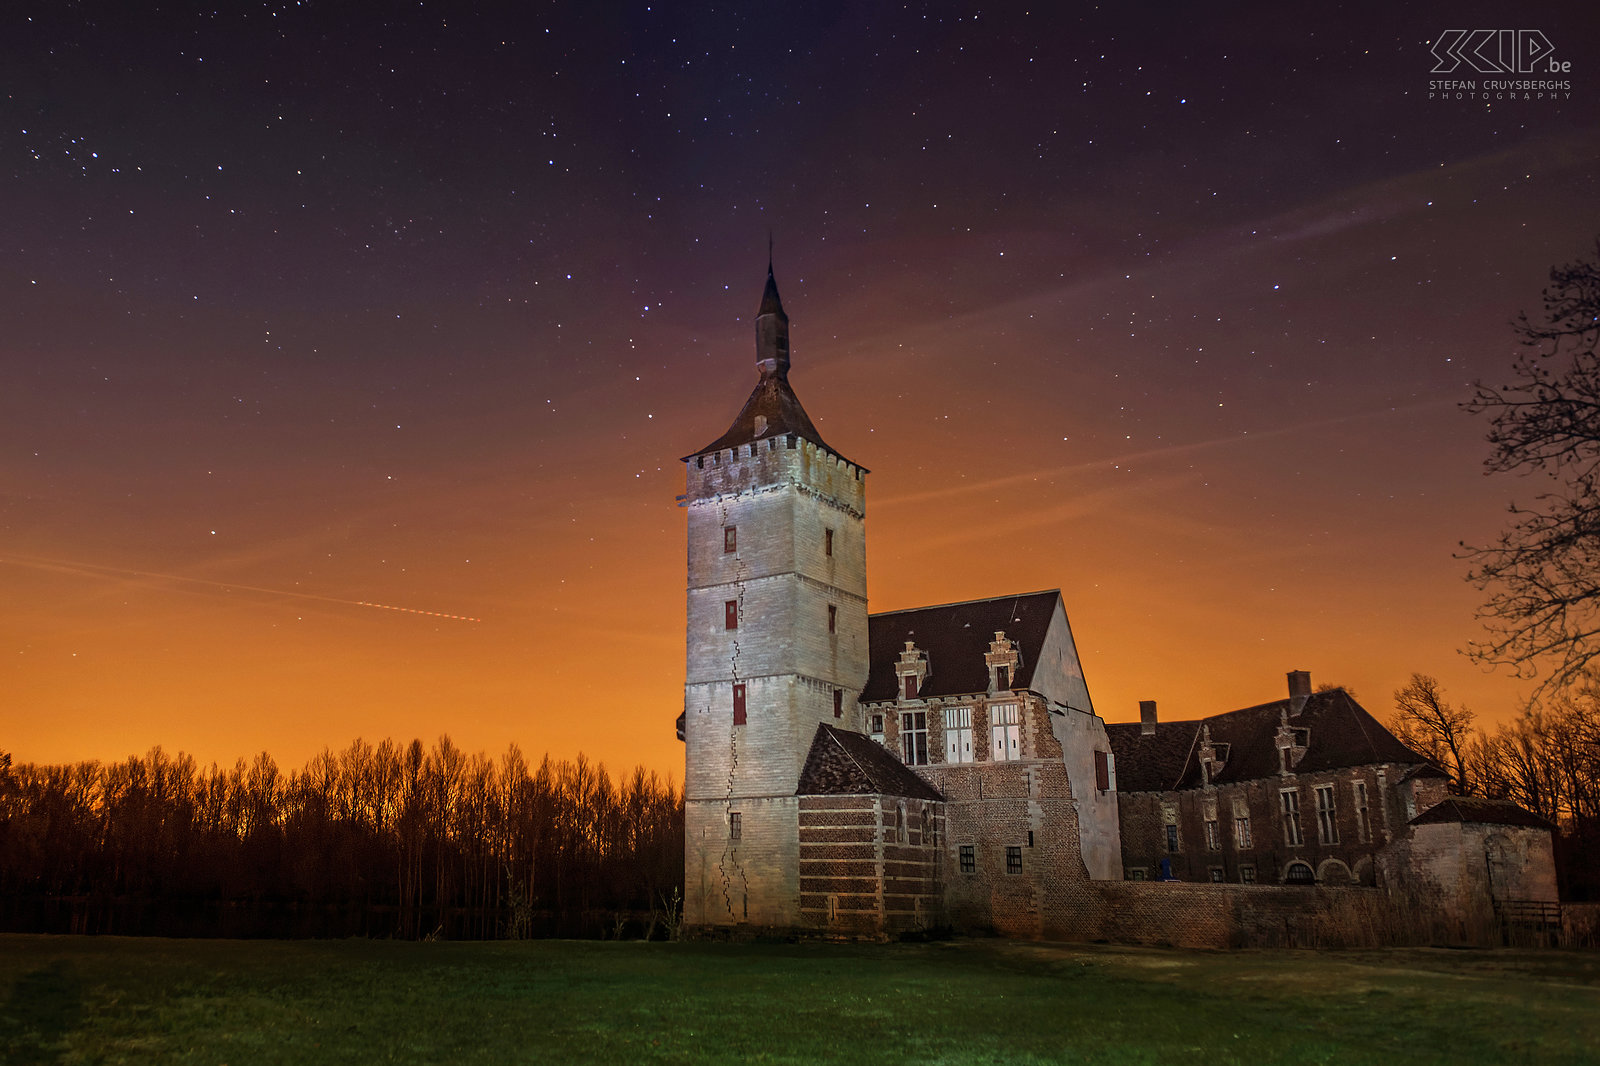 Sint-Pieters-Rode - Castle of Horst by night The castle and the chapel of Horst are photogenic landmarks near my new home. So in recent months I went out to photograph them several times, mostly in the evening and at night or when there were special weather conditions. I tried to create some unique photos of these monuments that differ from the images that already have been captured by many other people.<br />
 <br />
The castle of Horst is located in the village of Sint-Pieters-Rode (Holsbeek, Belgium). The castle was built in the mid-14th century and is still quite authentic. The former living rooms, made of brick and sandstone, are mostly from the 16th and 17th centuries.  Stefan Cruysberghs